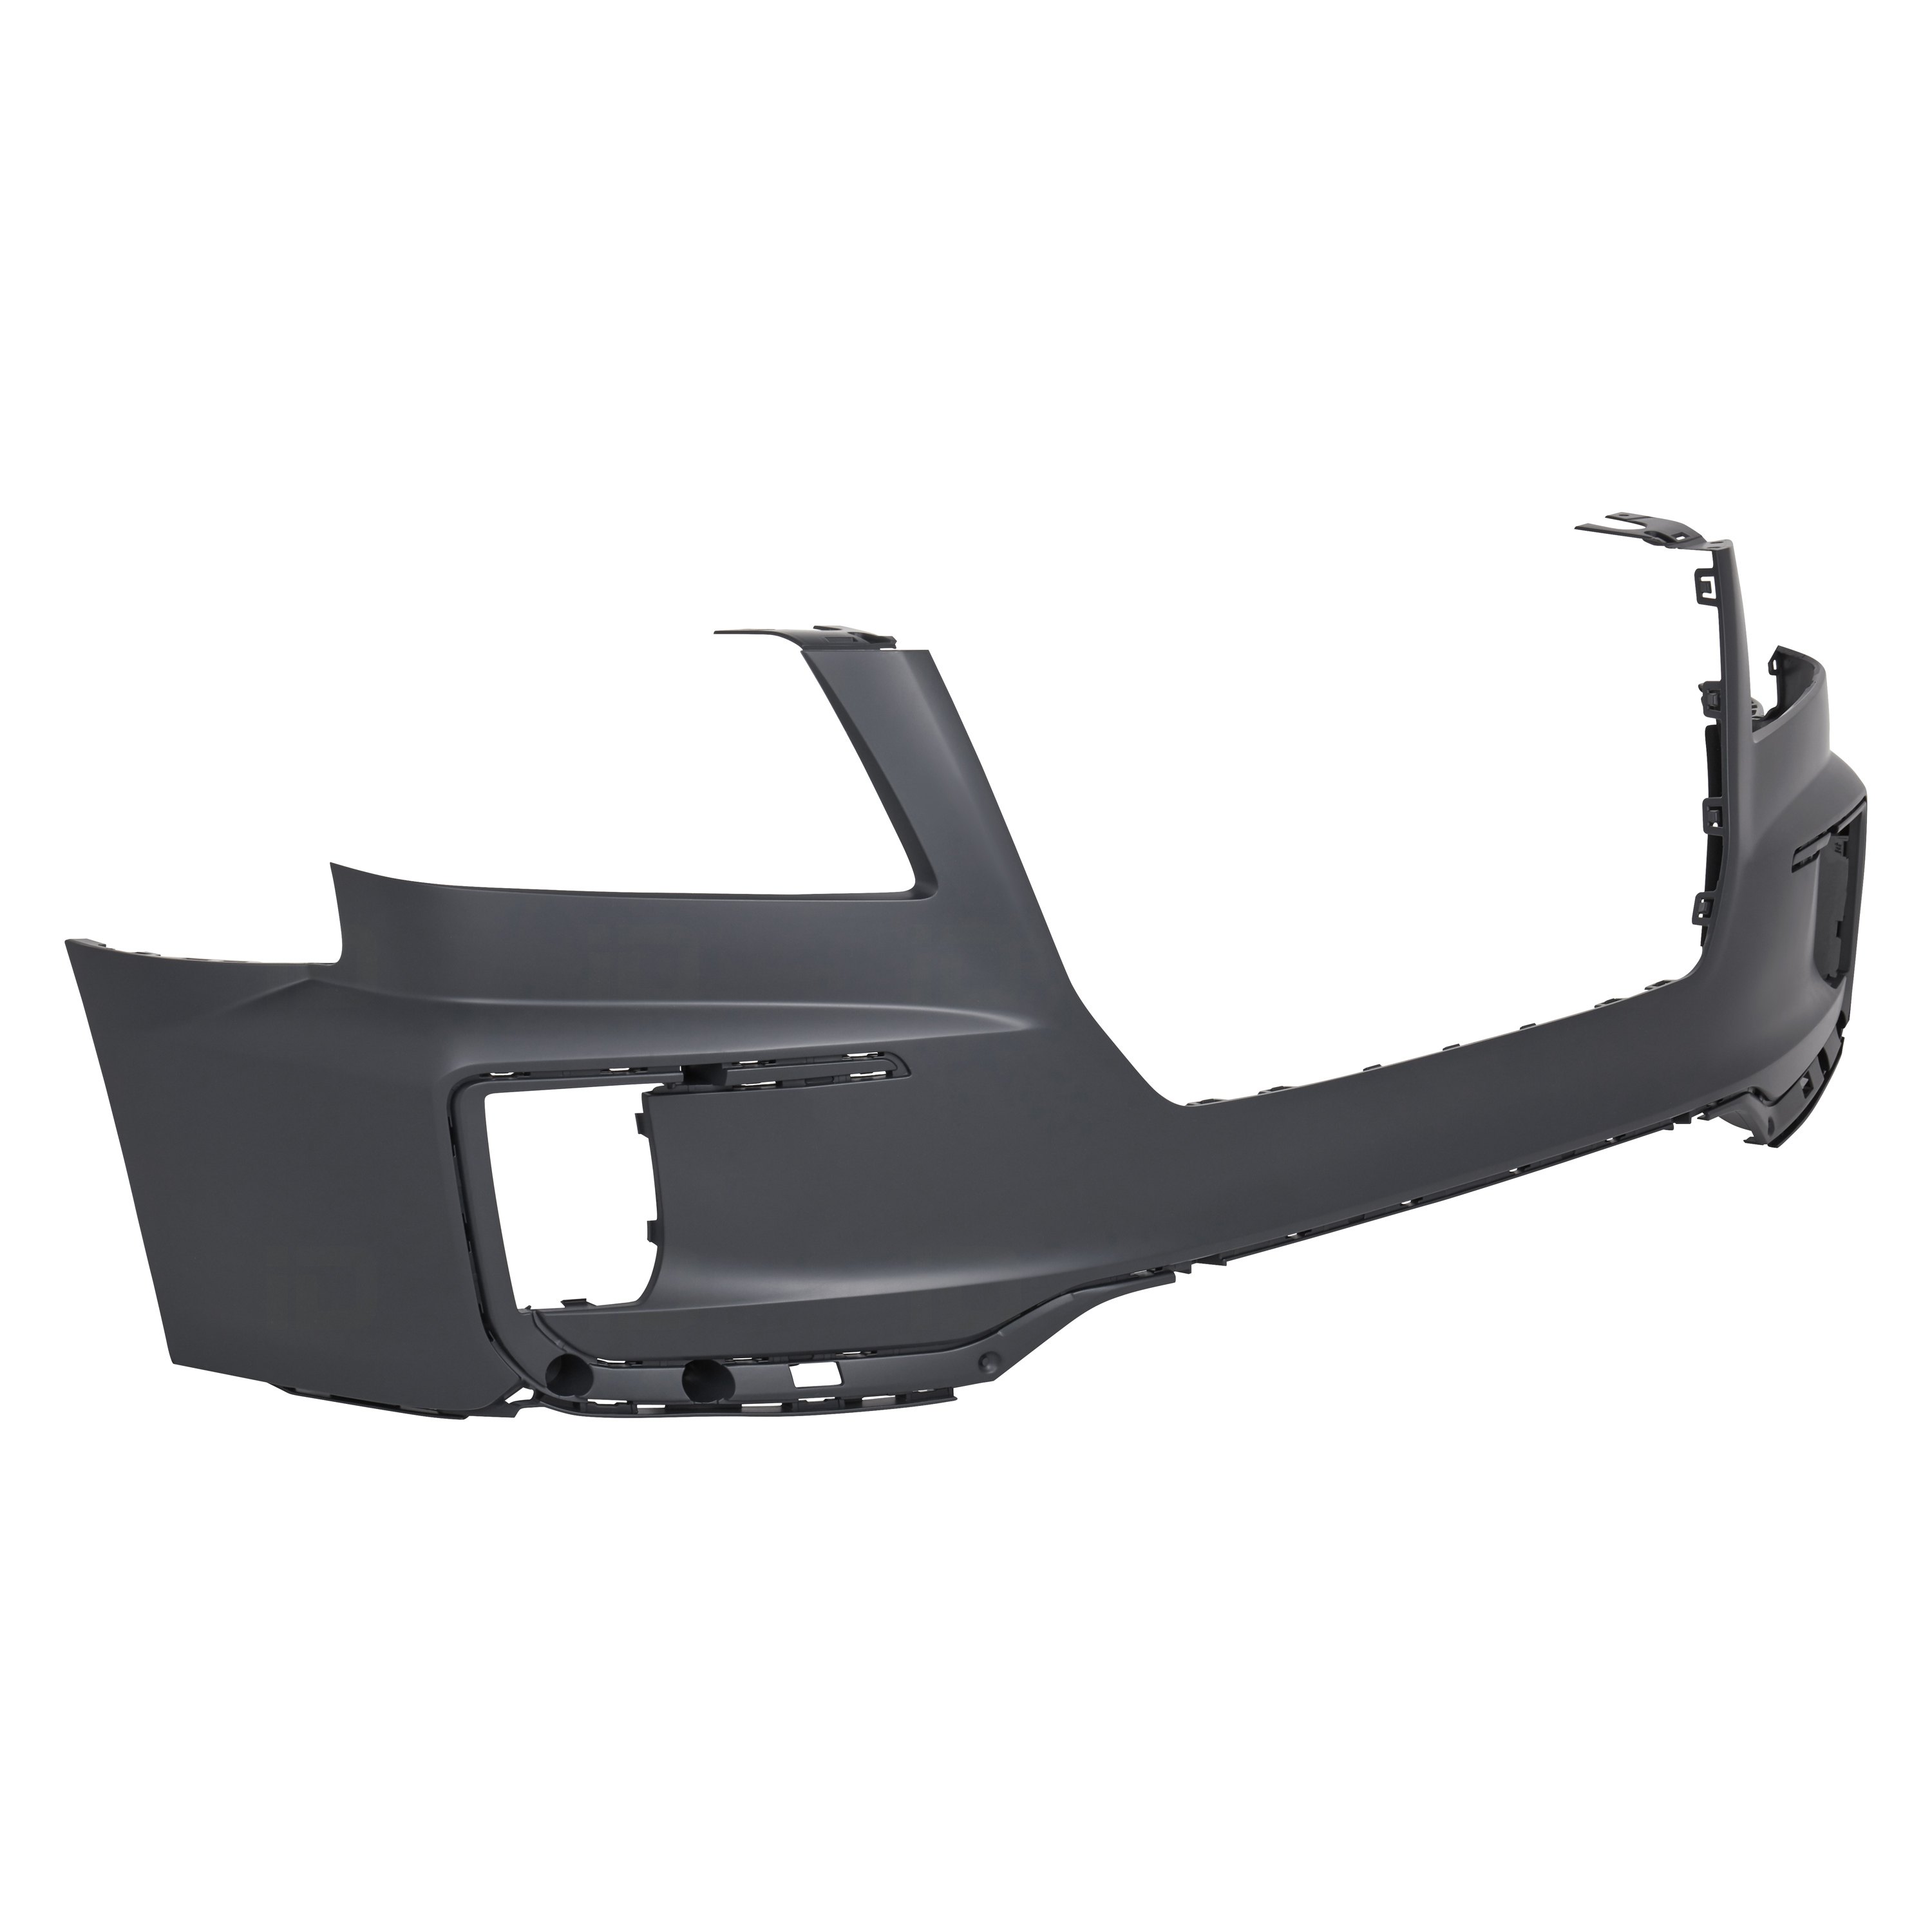 Replace® Gm1014122 Front Upper Bumper Cover Standard Line 3740